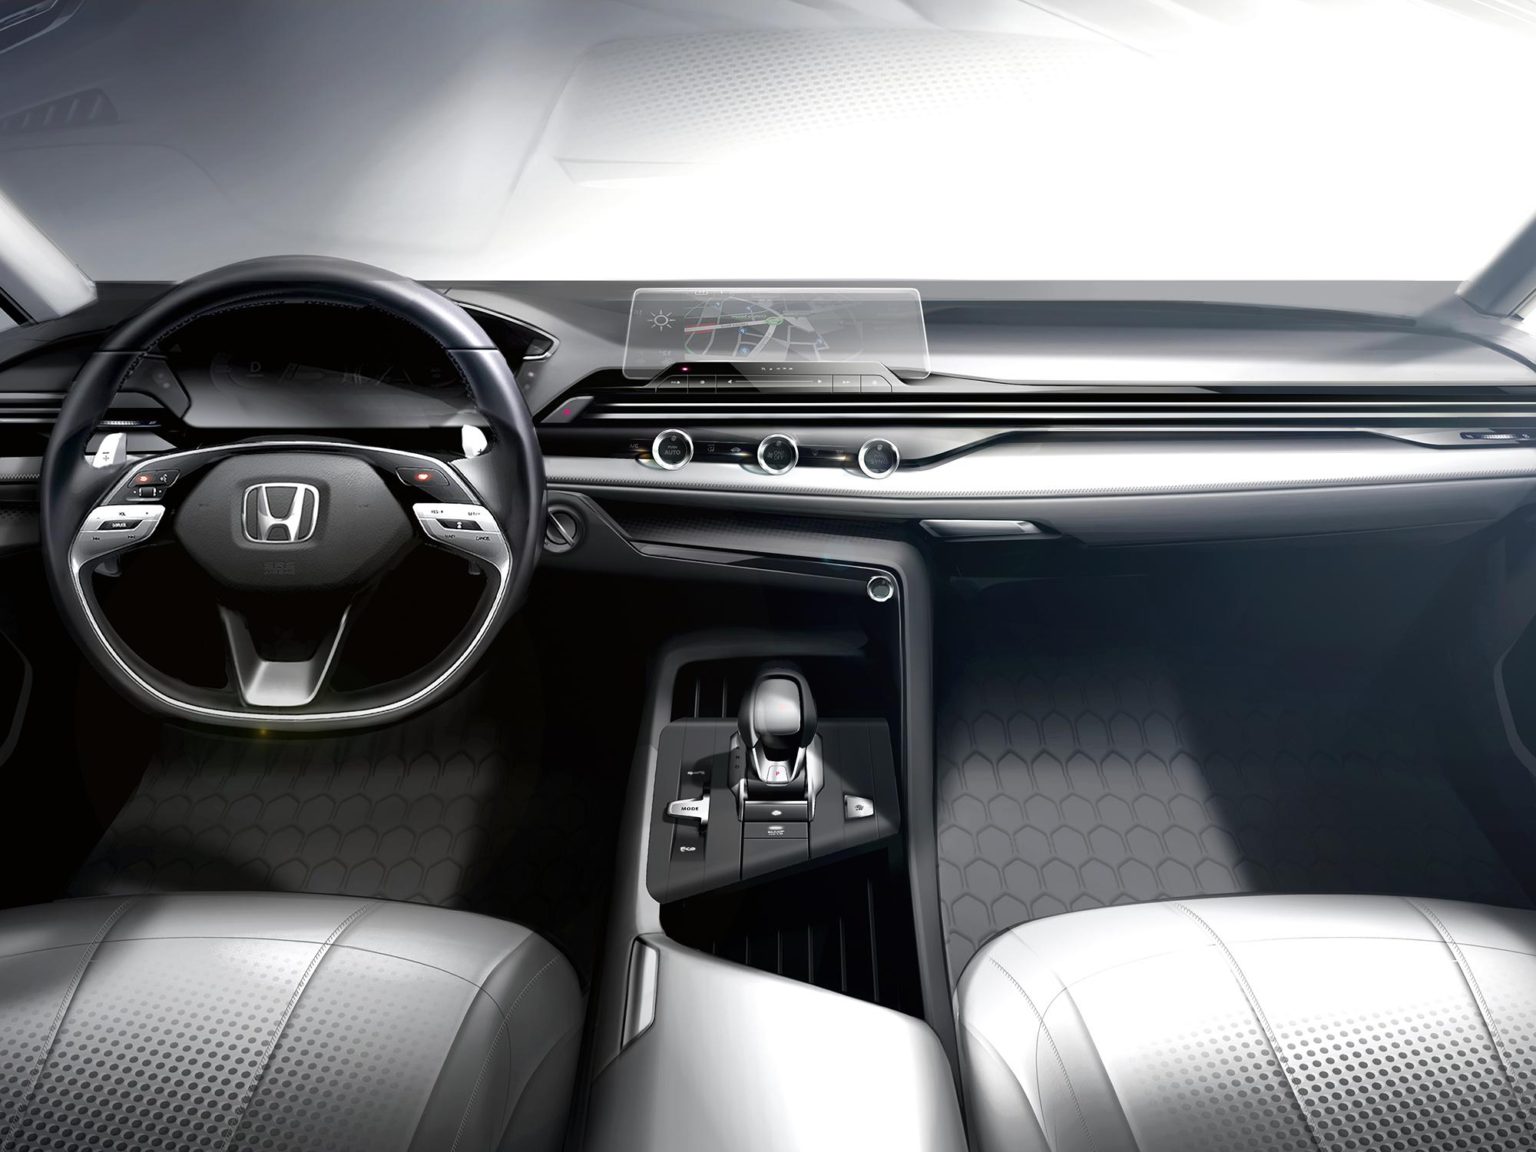 A new Honda design concept is coming to the interior of their lineup.